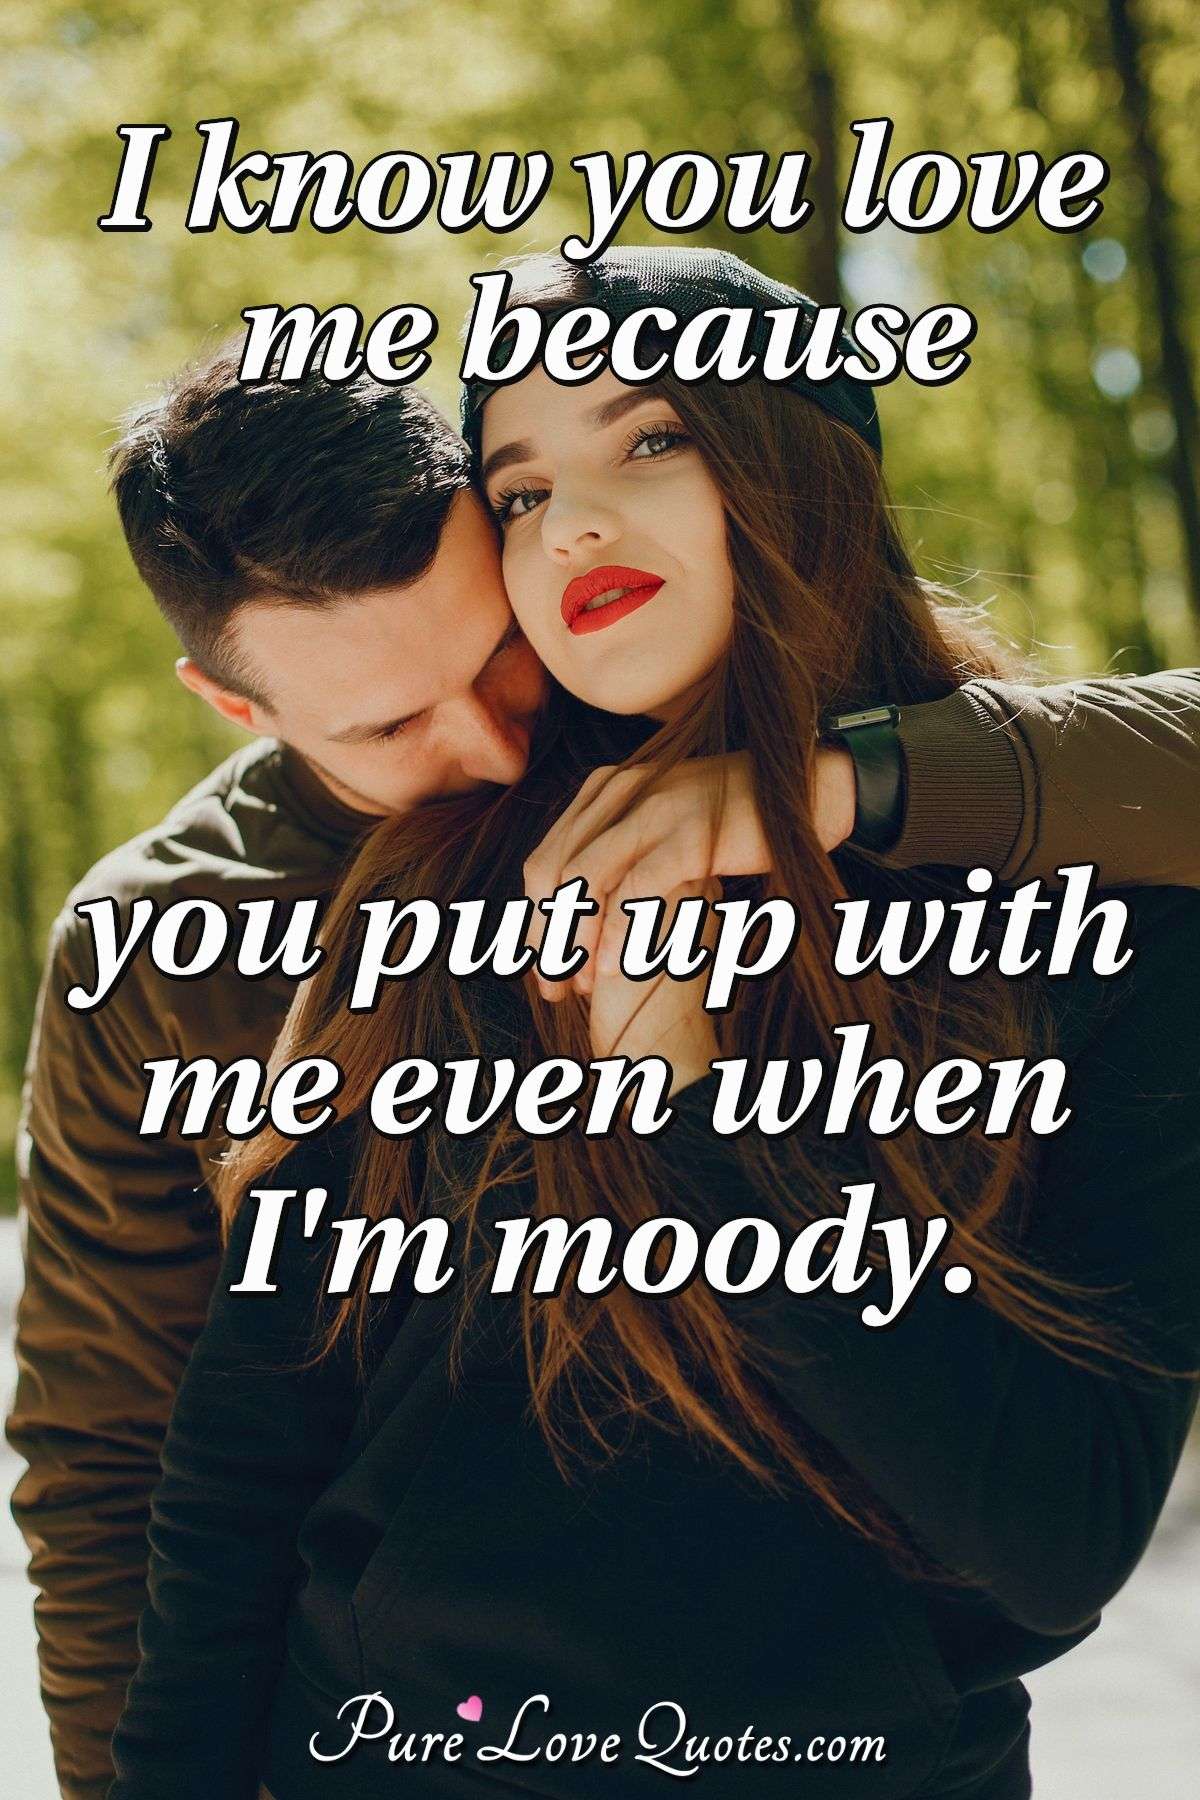 I know you love me because you put up with me even when I'm moody